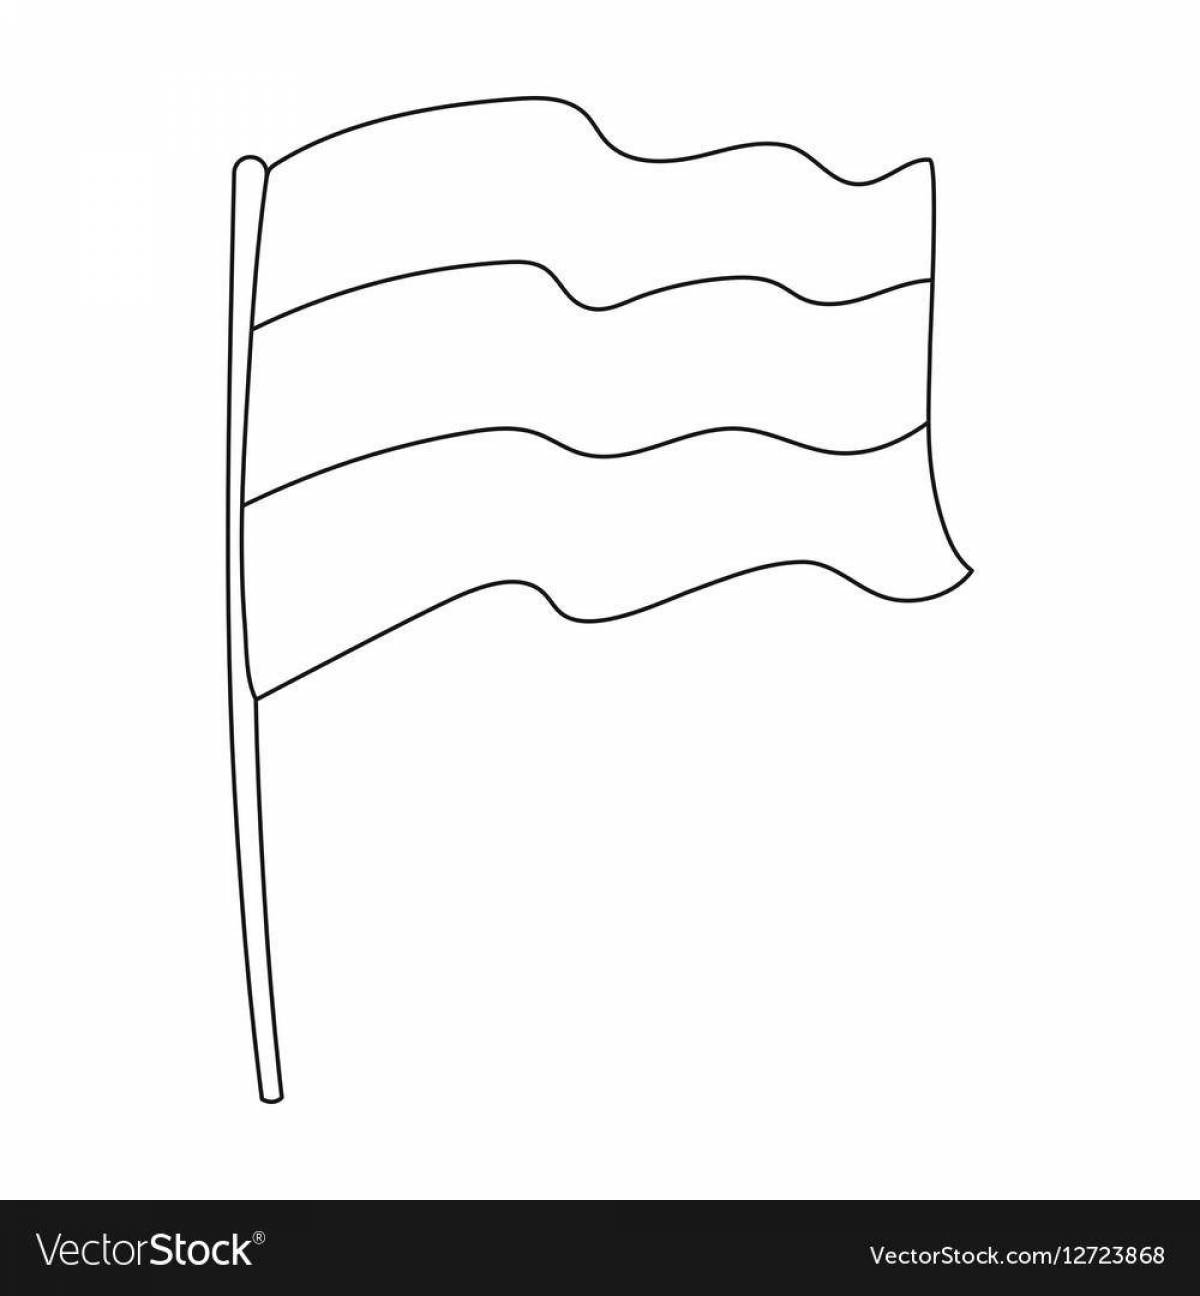 Amazing tricolor flag coloring page